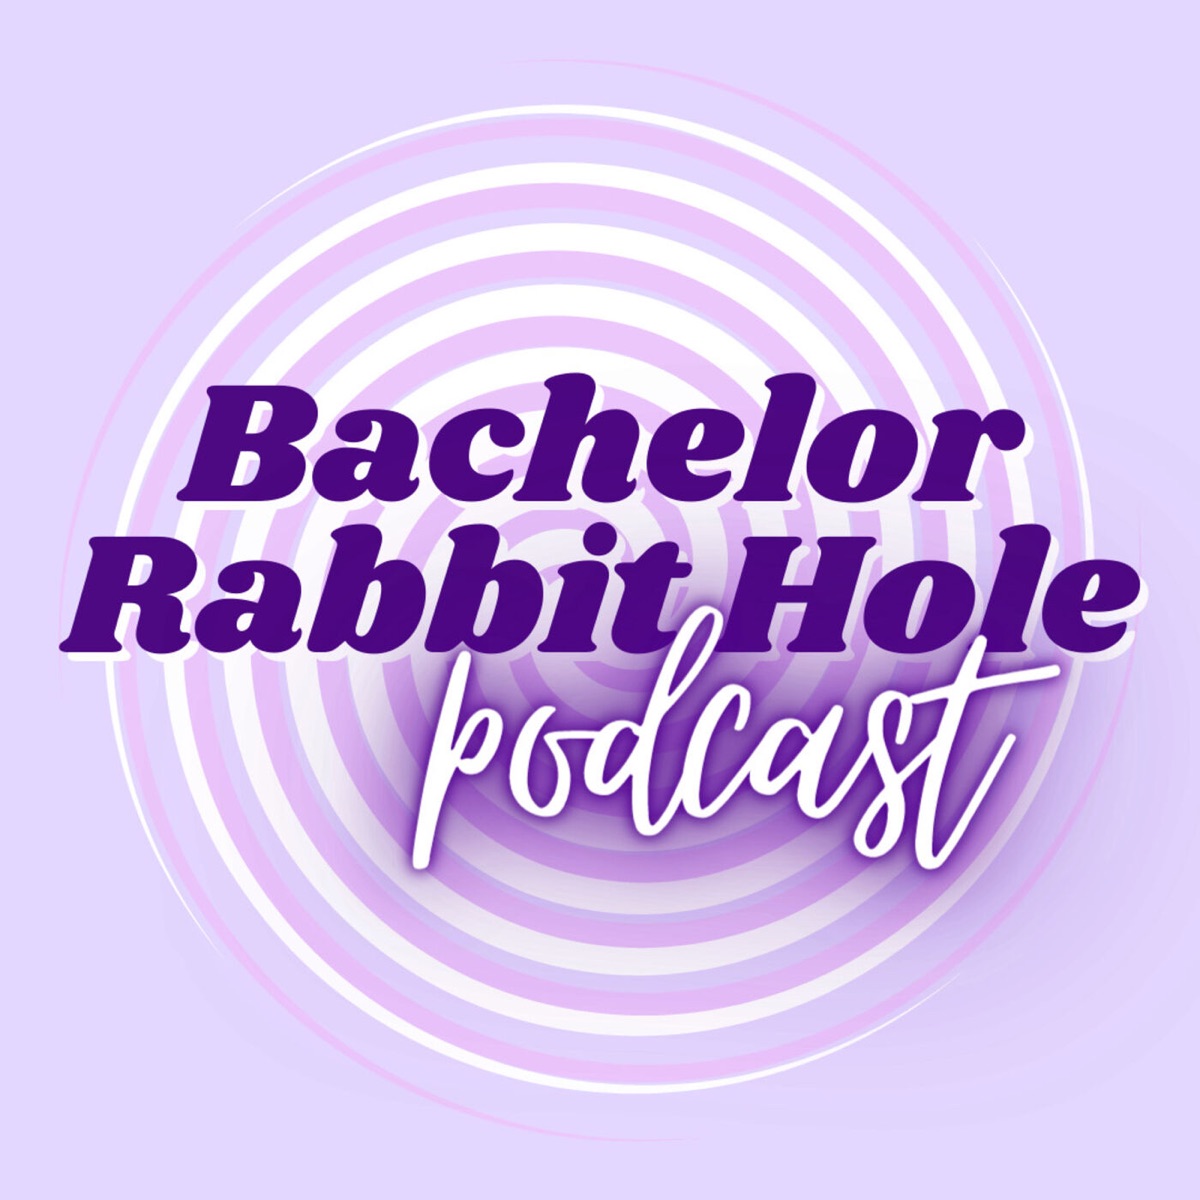 bring-on-the-bums-part-one-meet-gabby-and-rachel-s-men-bachelor-rabbit-hole